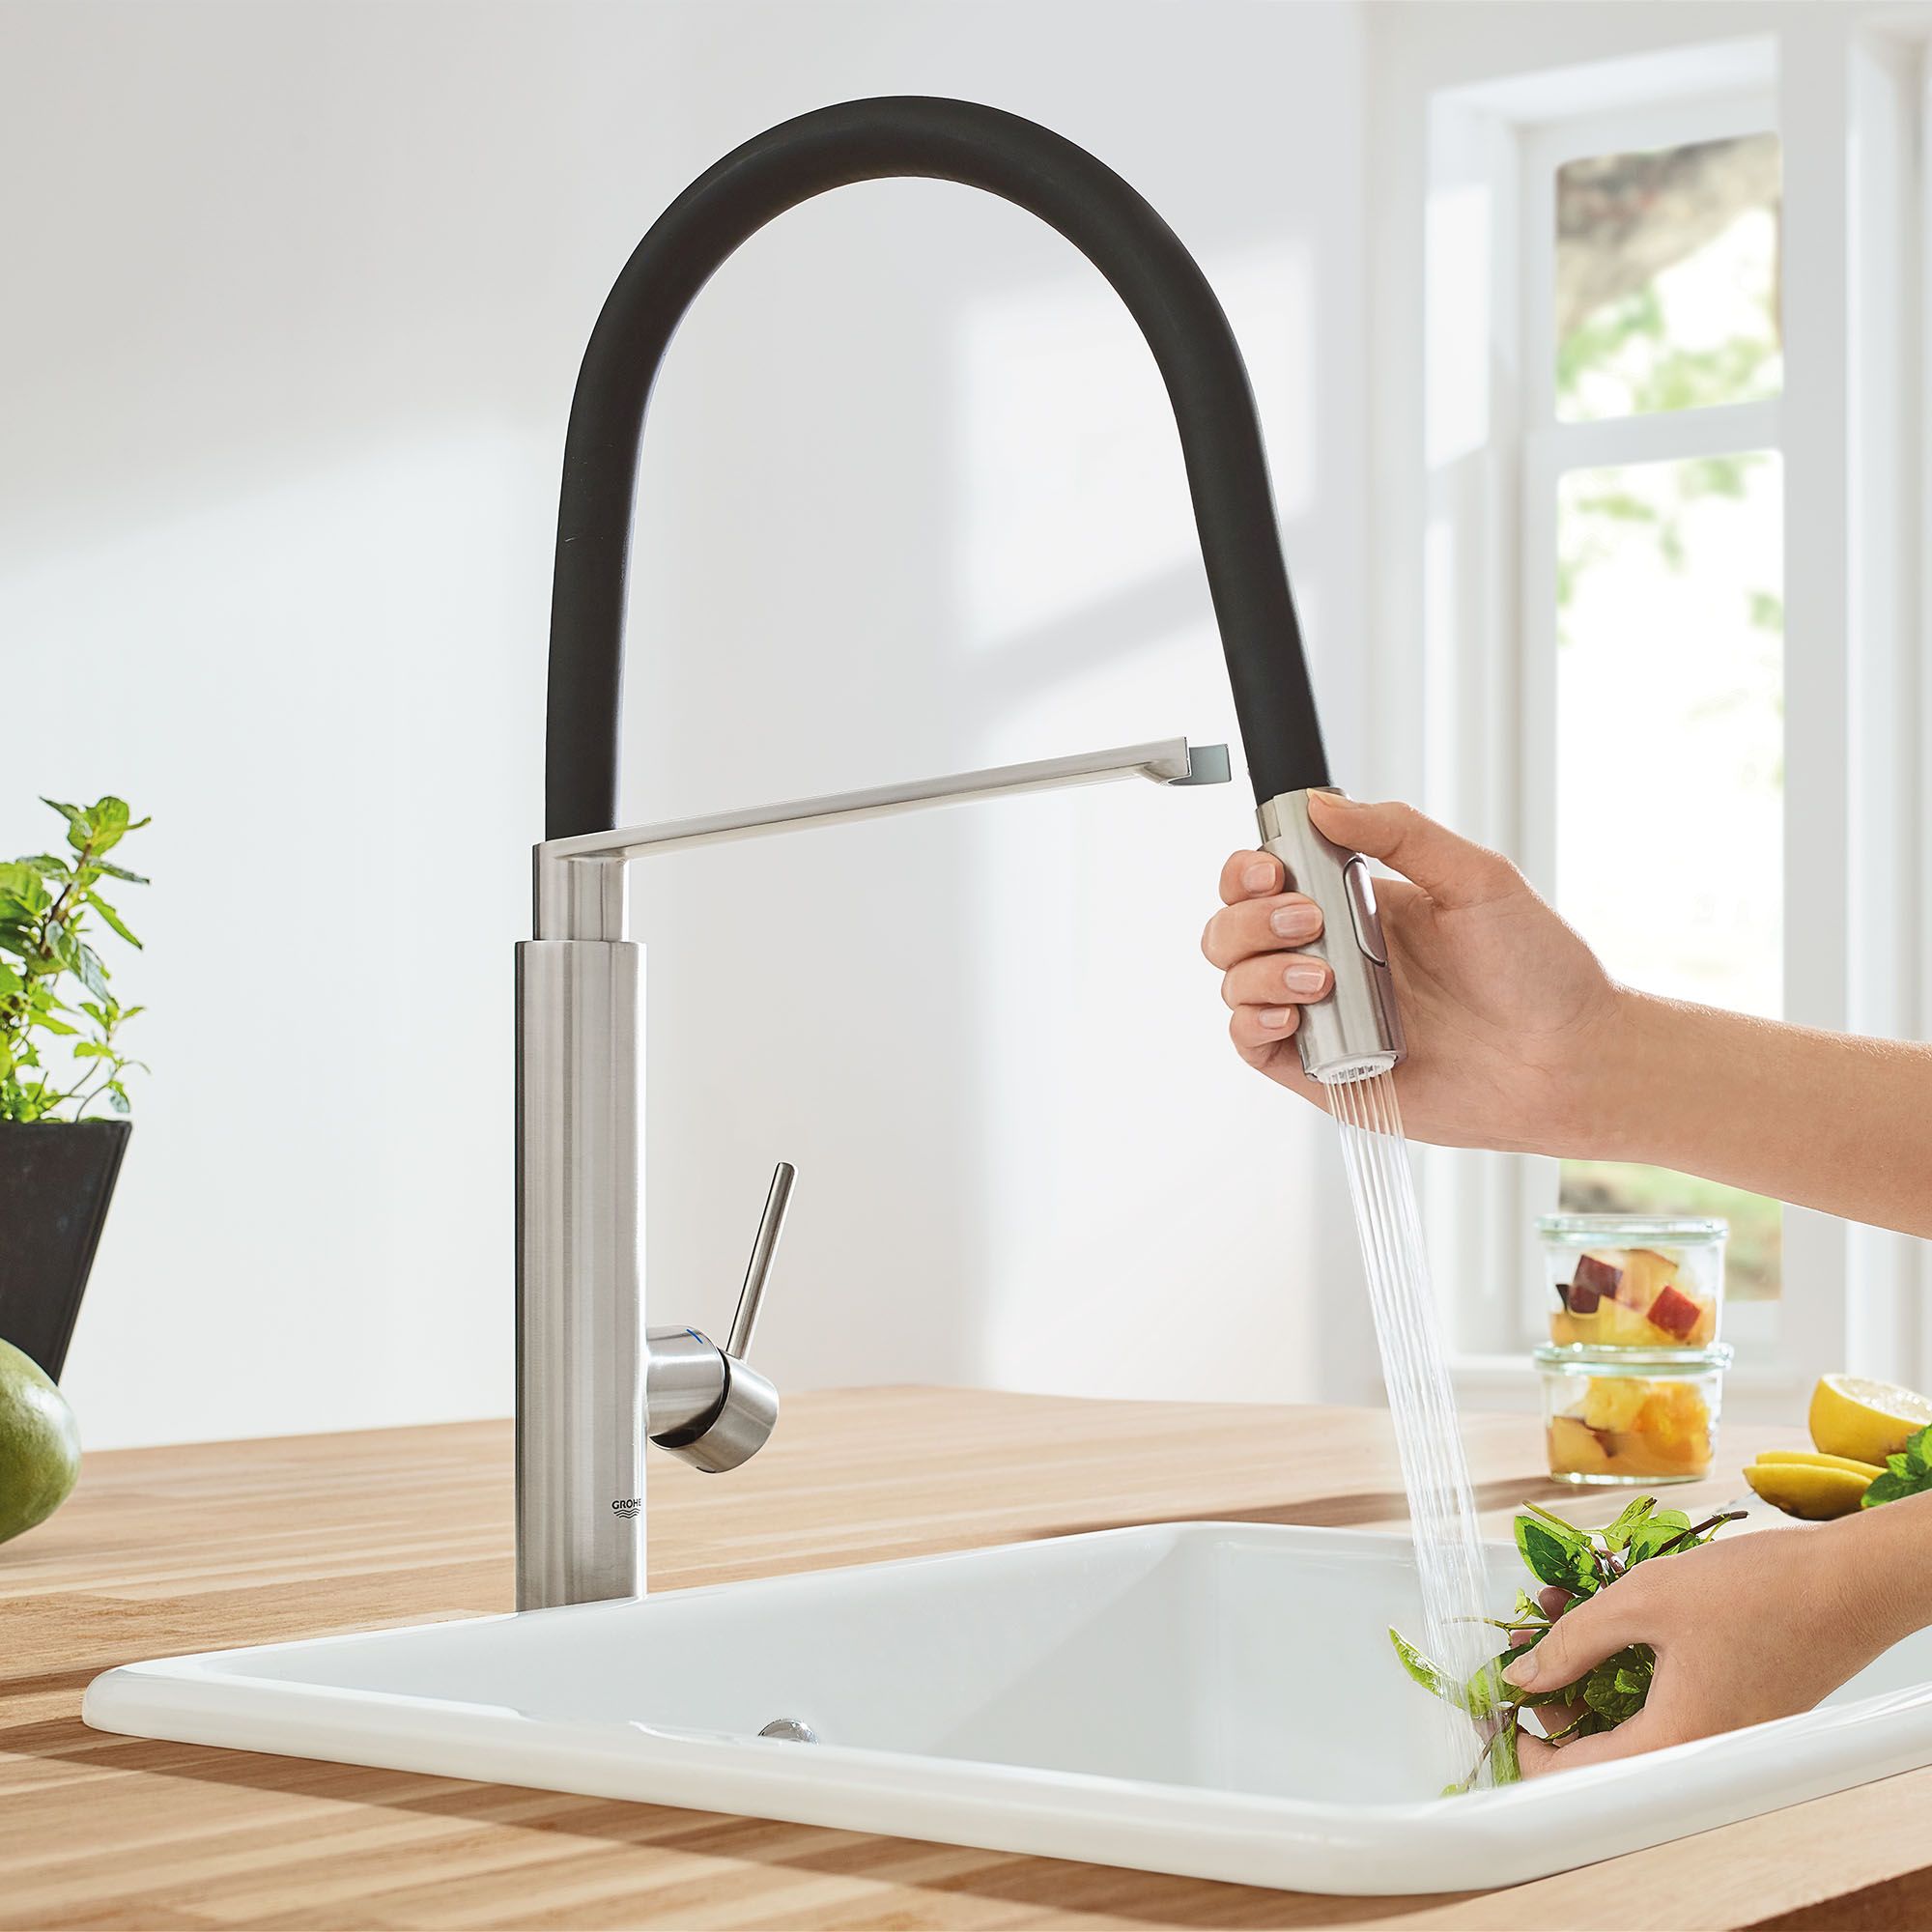 GROHE Concetto Supersteel Single Handle Pre-rinse Kitchen Faucet in Kitchen Faucets department at